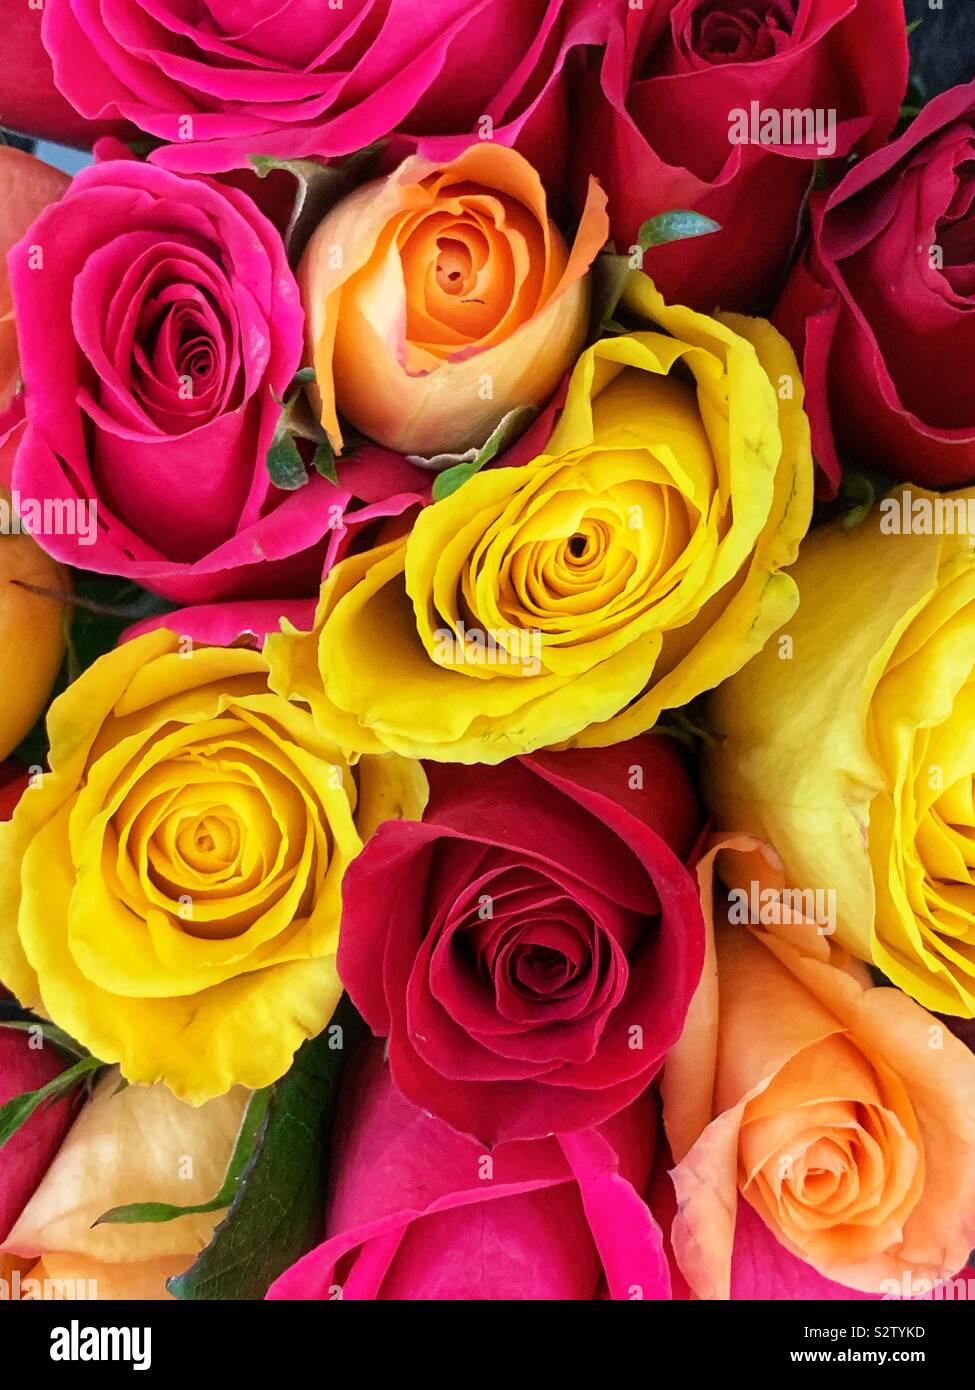 Beautiful colorful bouquet of red, pink, yellow, and orange roses in full bloom. Stock Photo